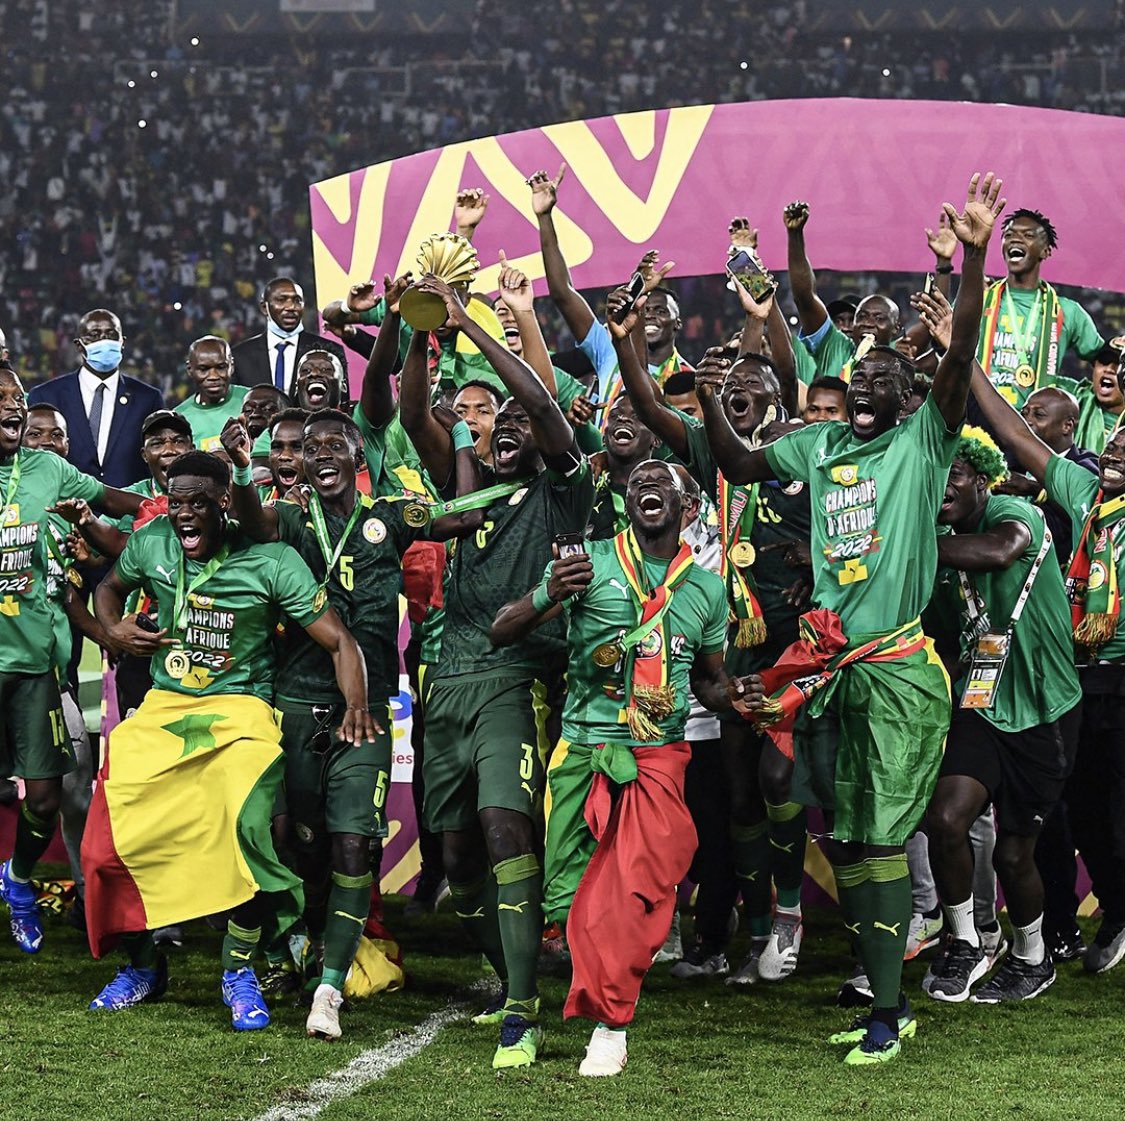 Senegal are the champions of Africa after defeating Egypt on penalties #AFCON2022 #AFCONFINAL #SENEGY